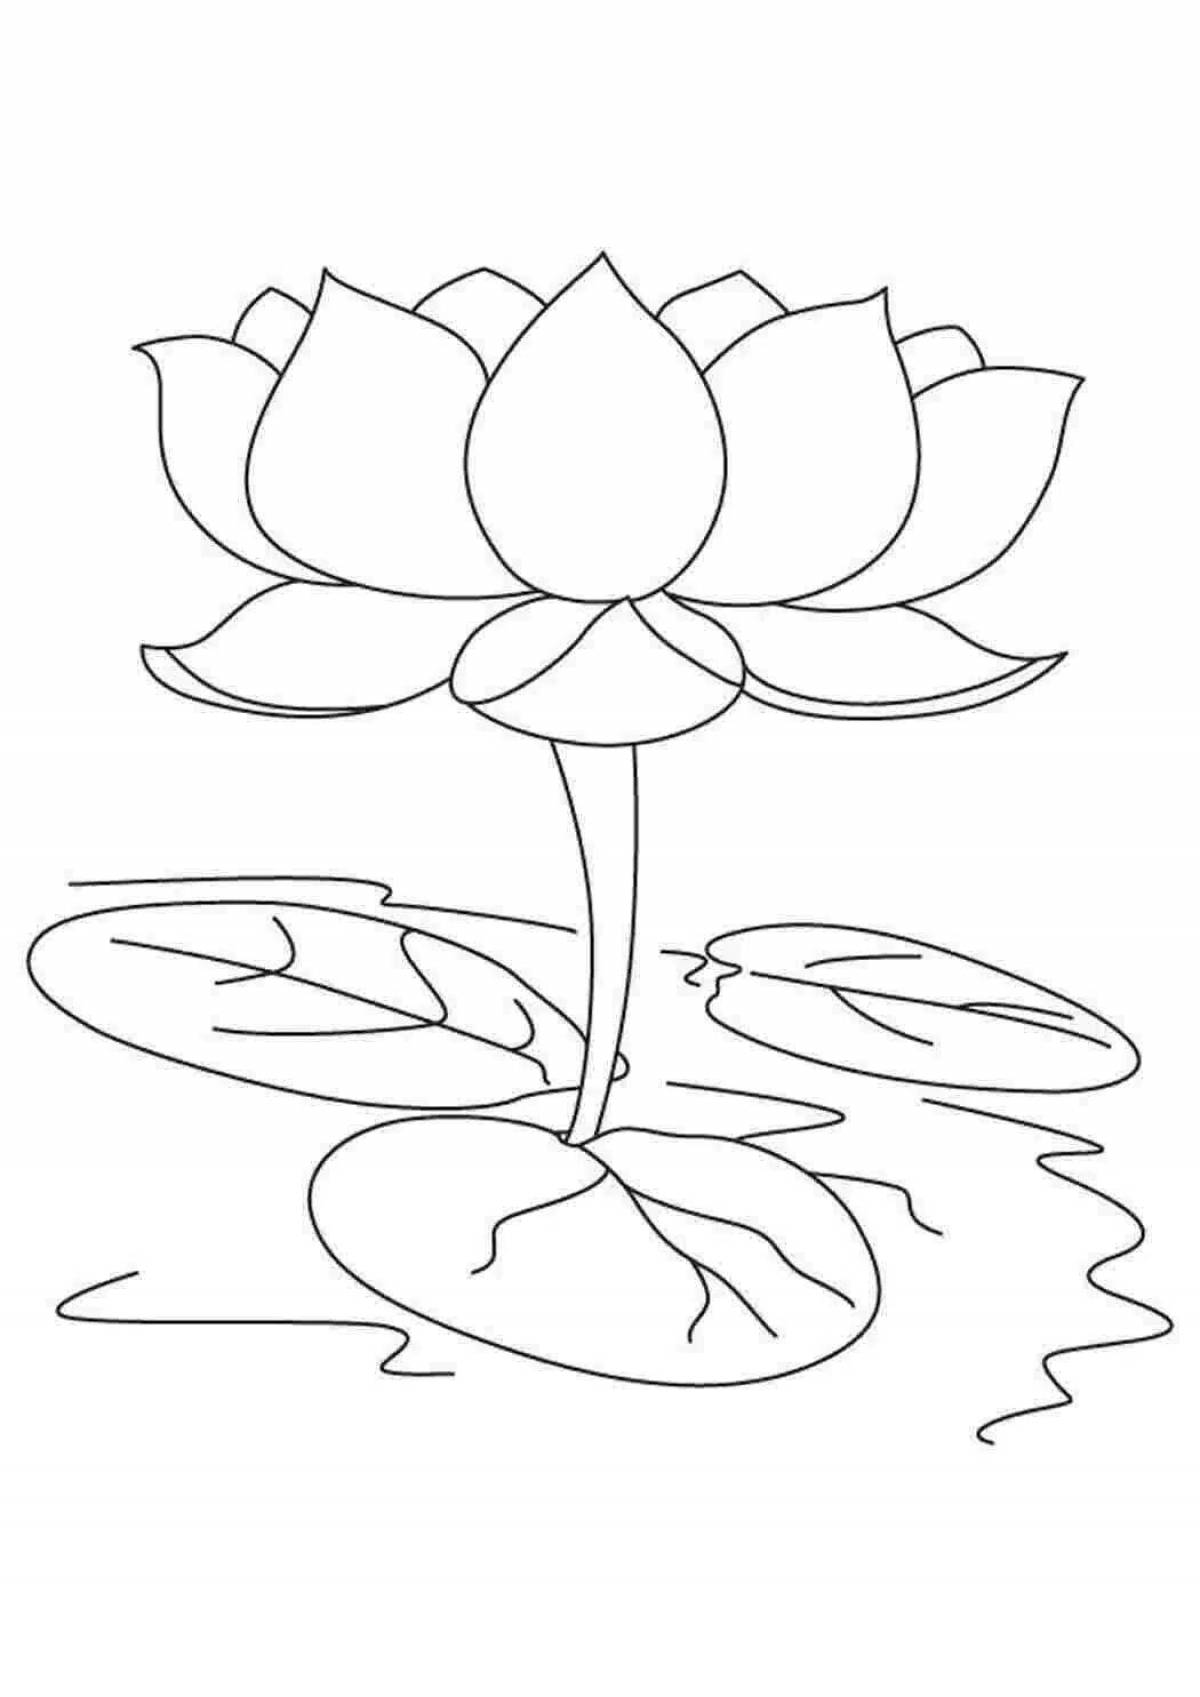 An unknown flower's playful coloring page